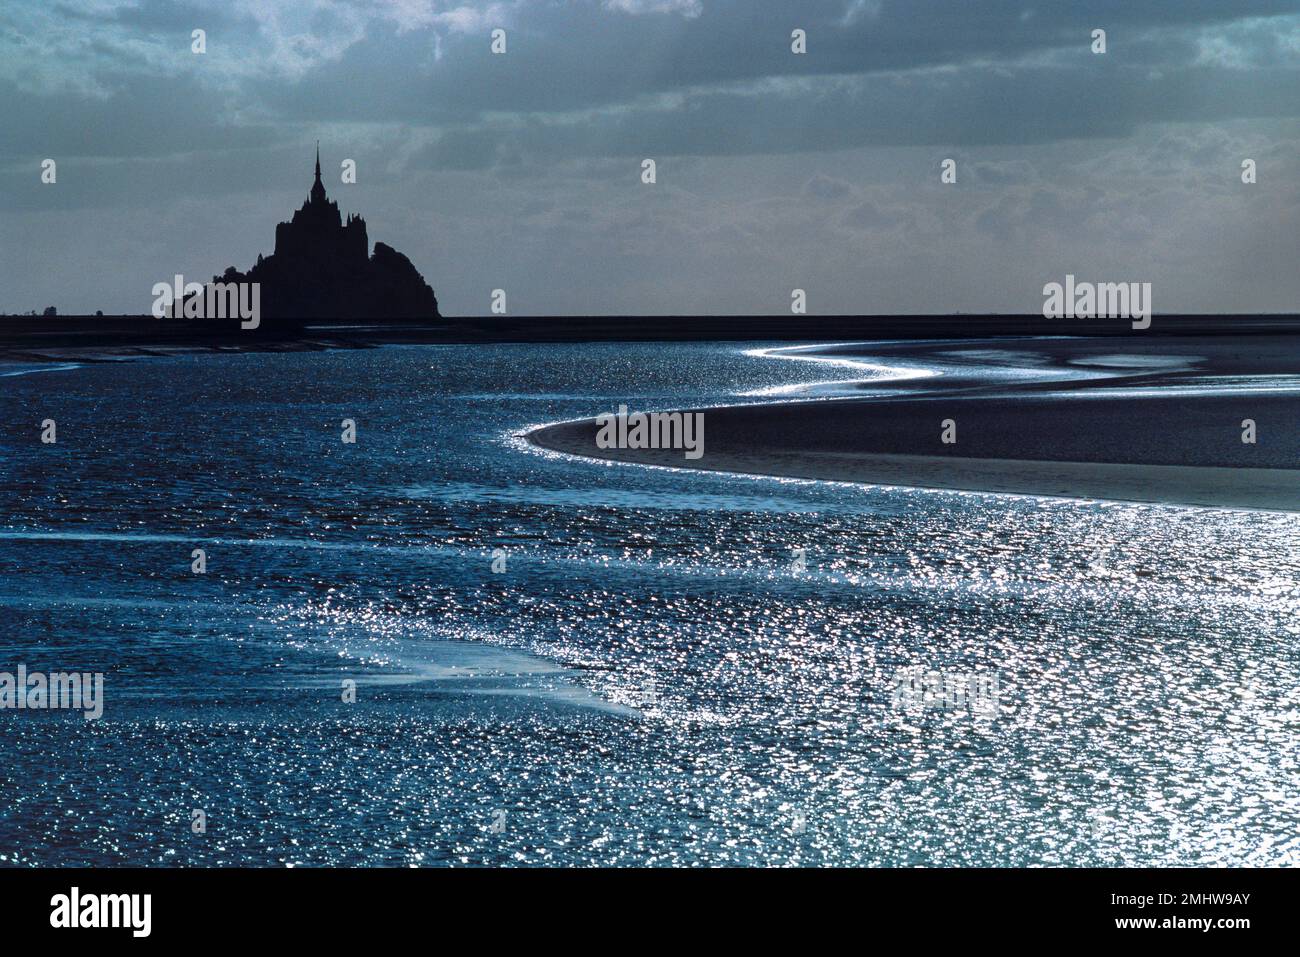 Mont Saint Michel France, evening view of Mont St Michel in silhouette surrounded by a moonlit beach at low tide, Normandy, France Stock Photo